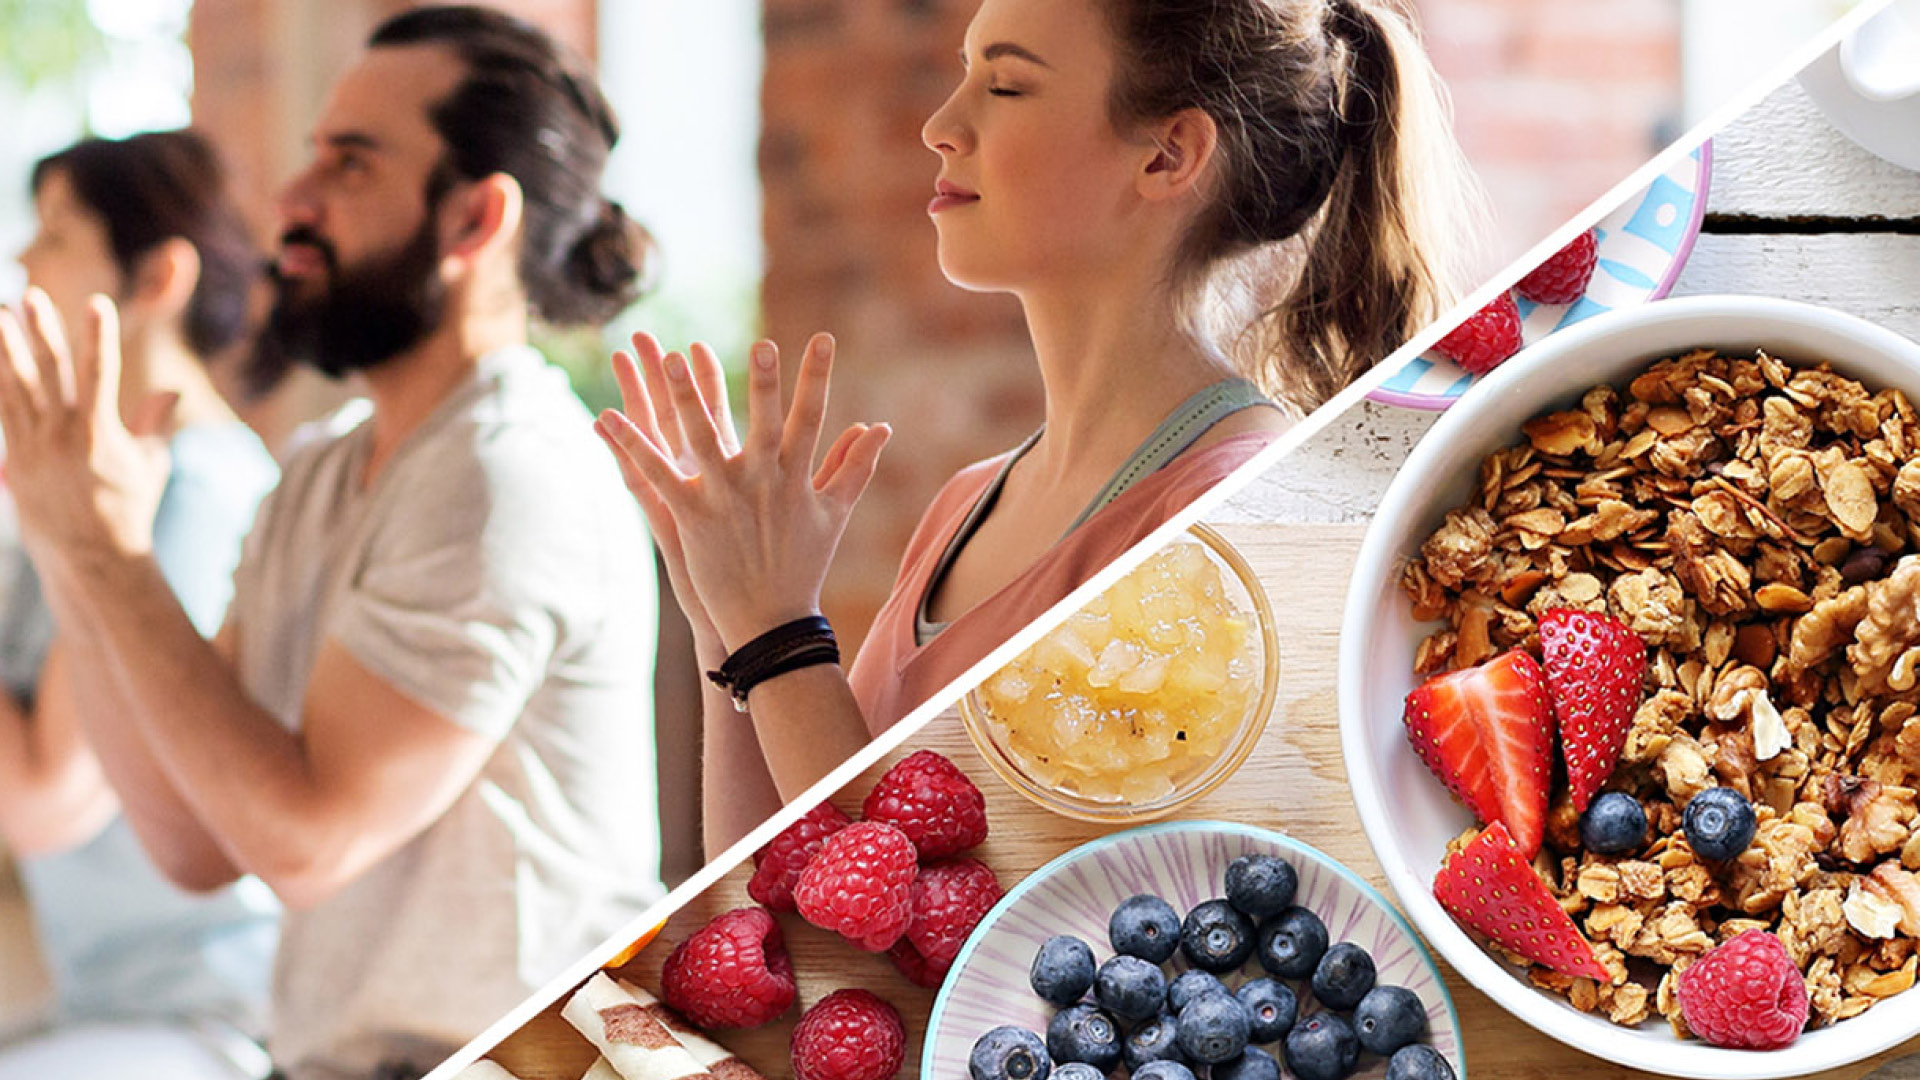 Two people doing yoga. They have adopted a sitting yoga position. On the opposite side there is crispy muesli with fresh berries, illustrating the brunch. 